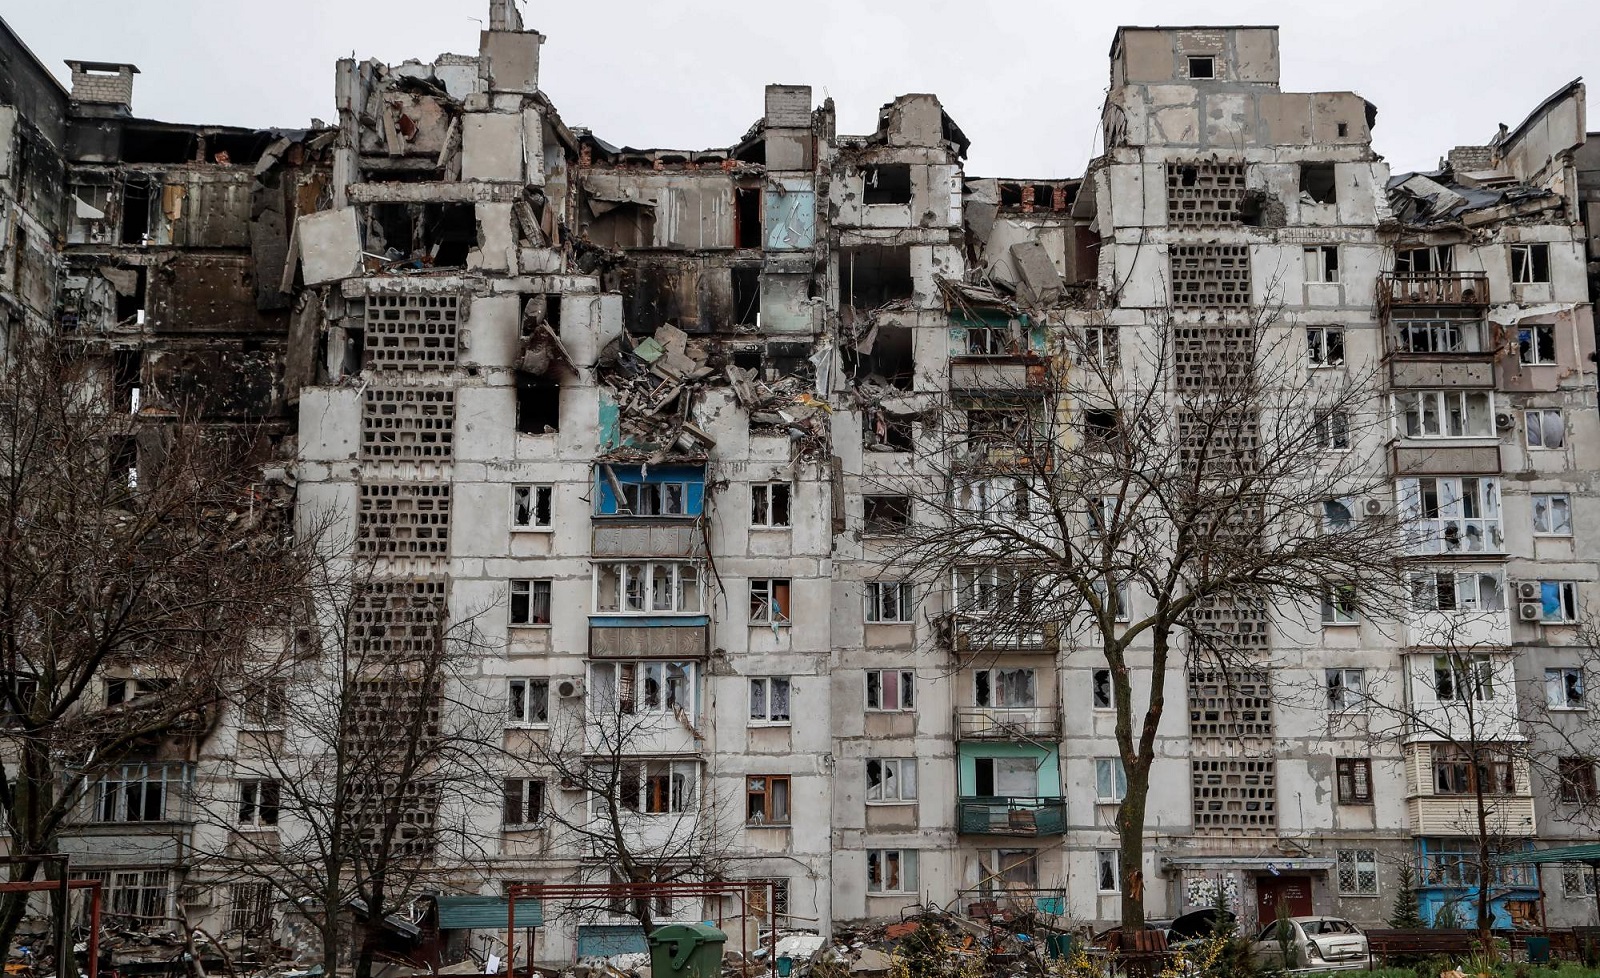 The destroyed city of Mariupol